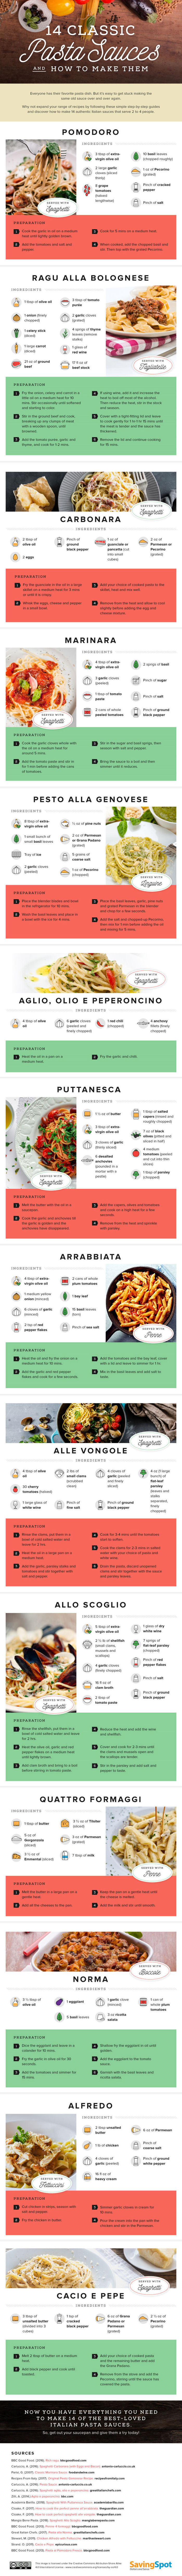 Pasta Sauces How to Make Them Infographic